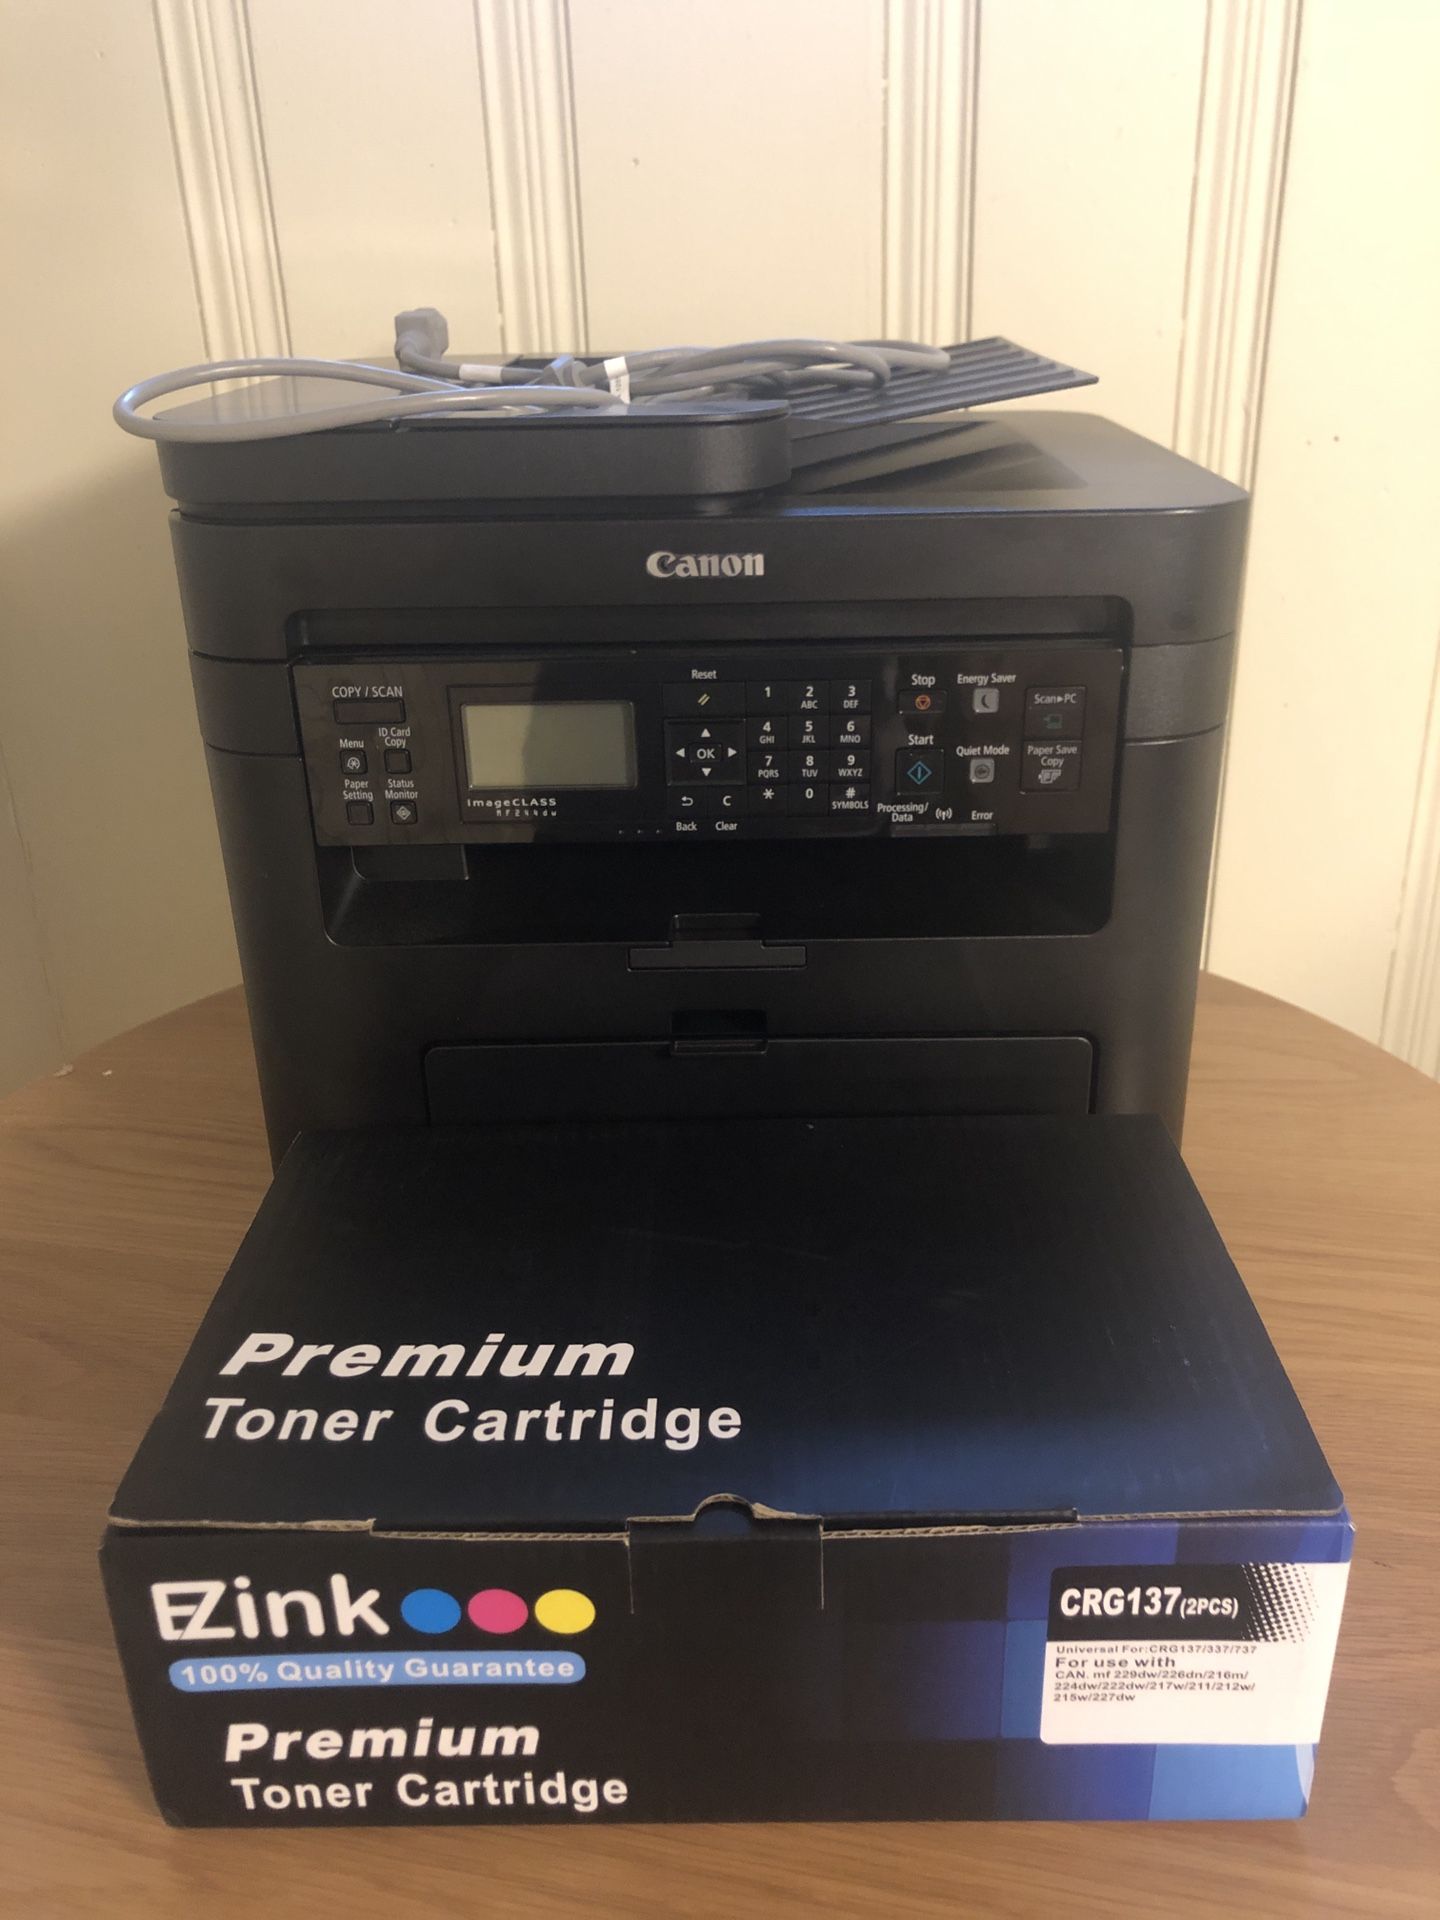 Canon Printer - WiFi Enabled w/Ink!